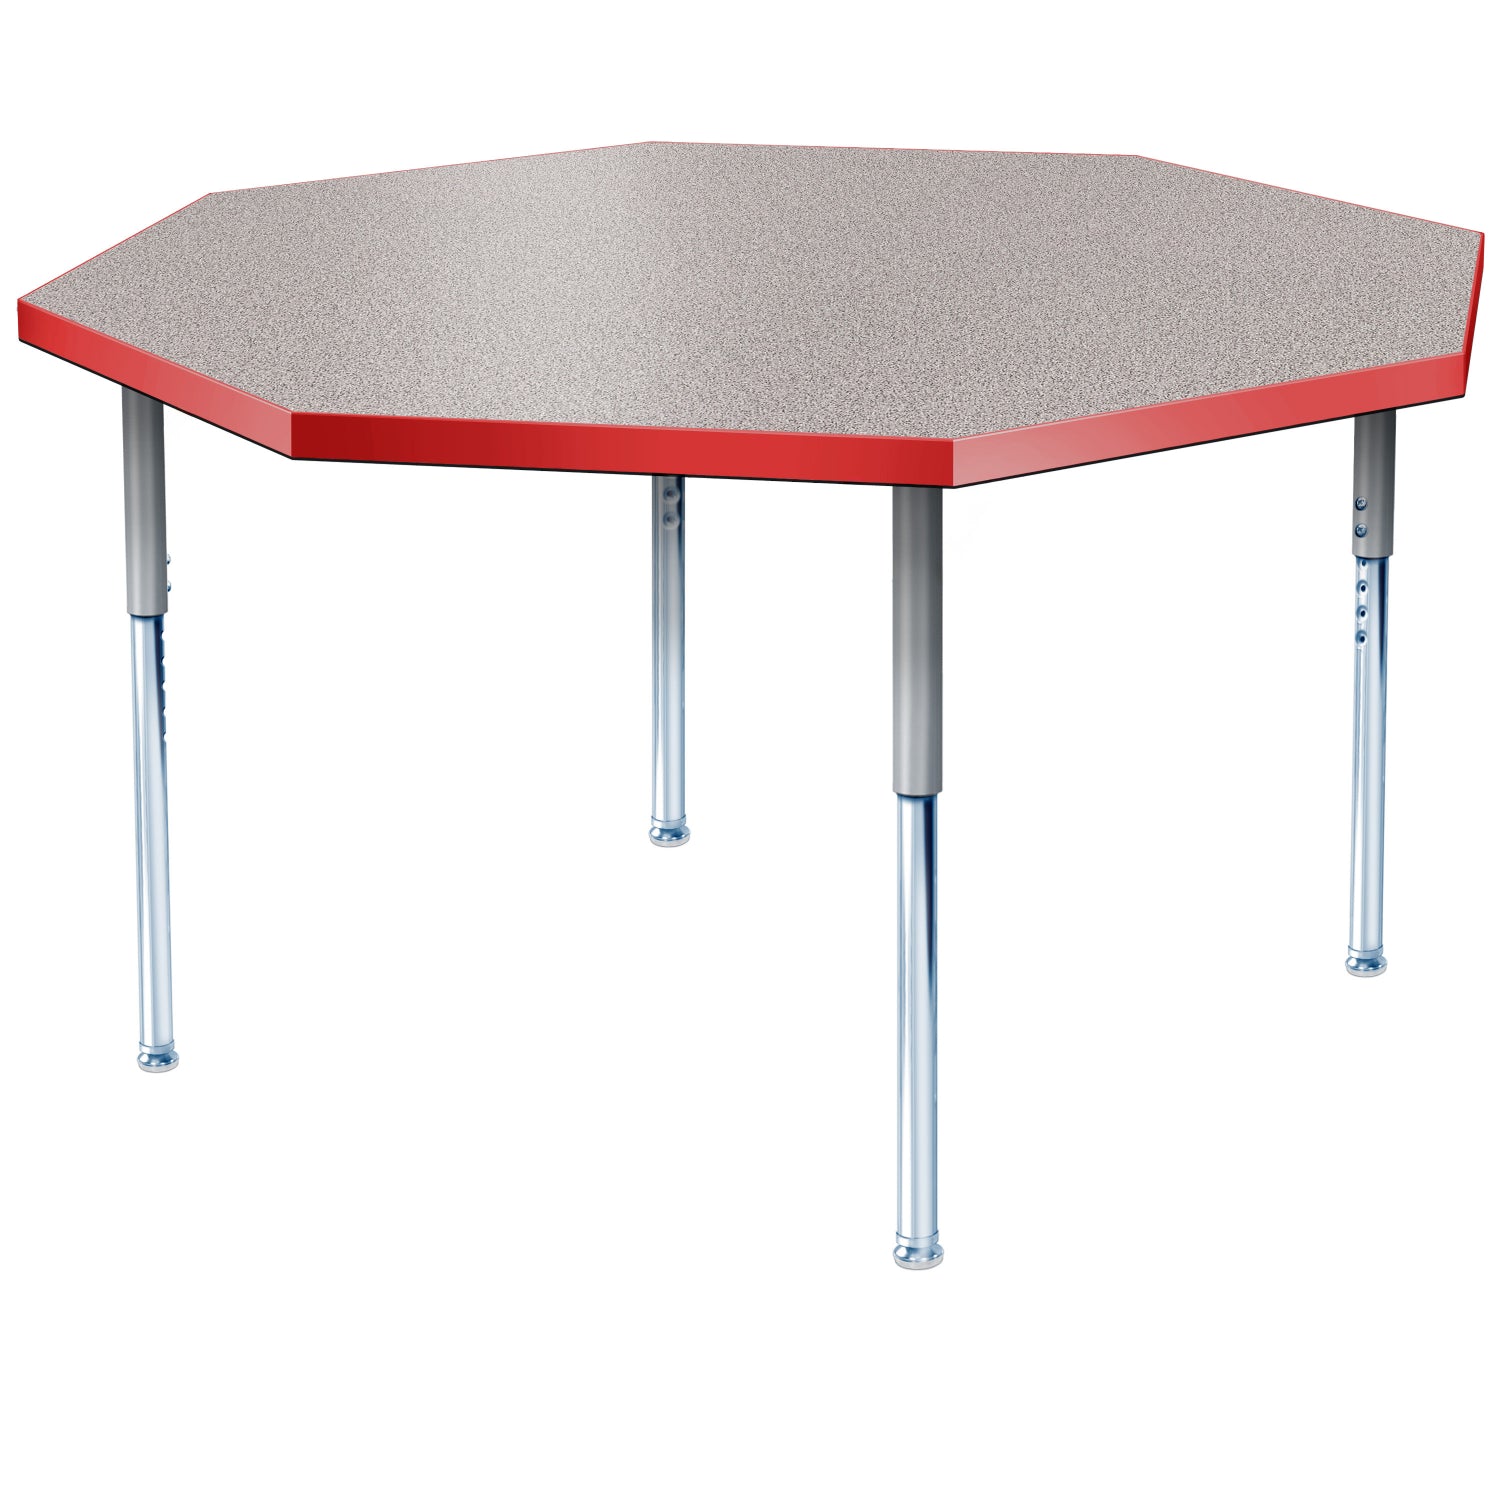 Modern Classic Series 48" Octagon Activity Table with High Pressure Laminate Top, Adjustable Height Legs